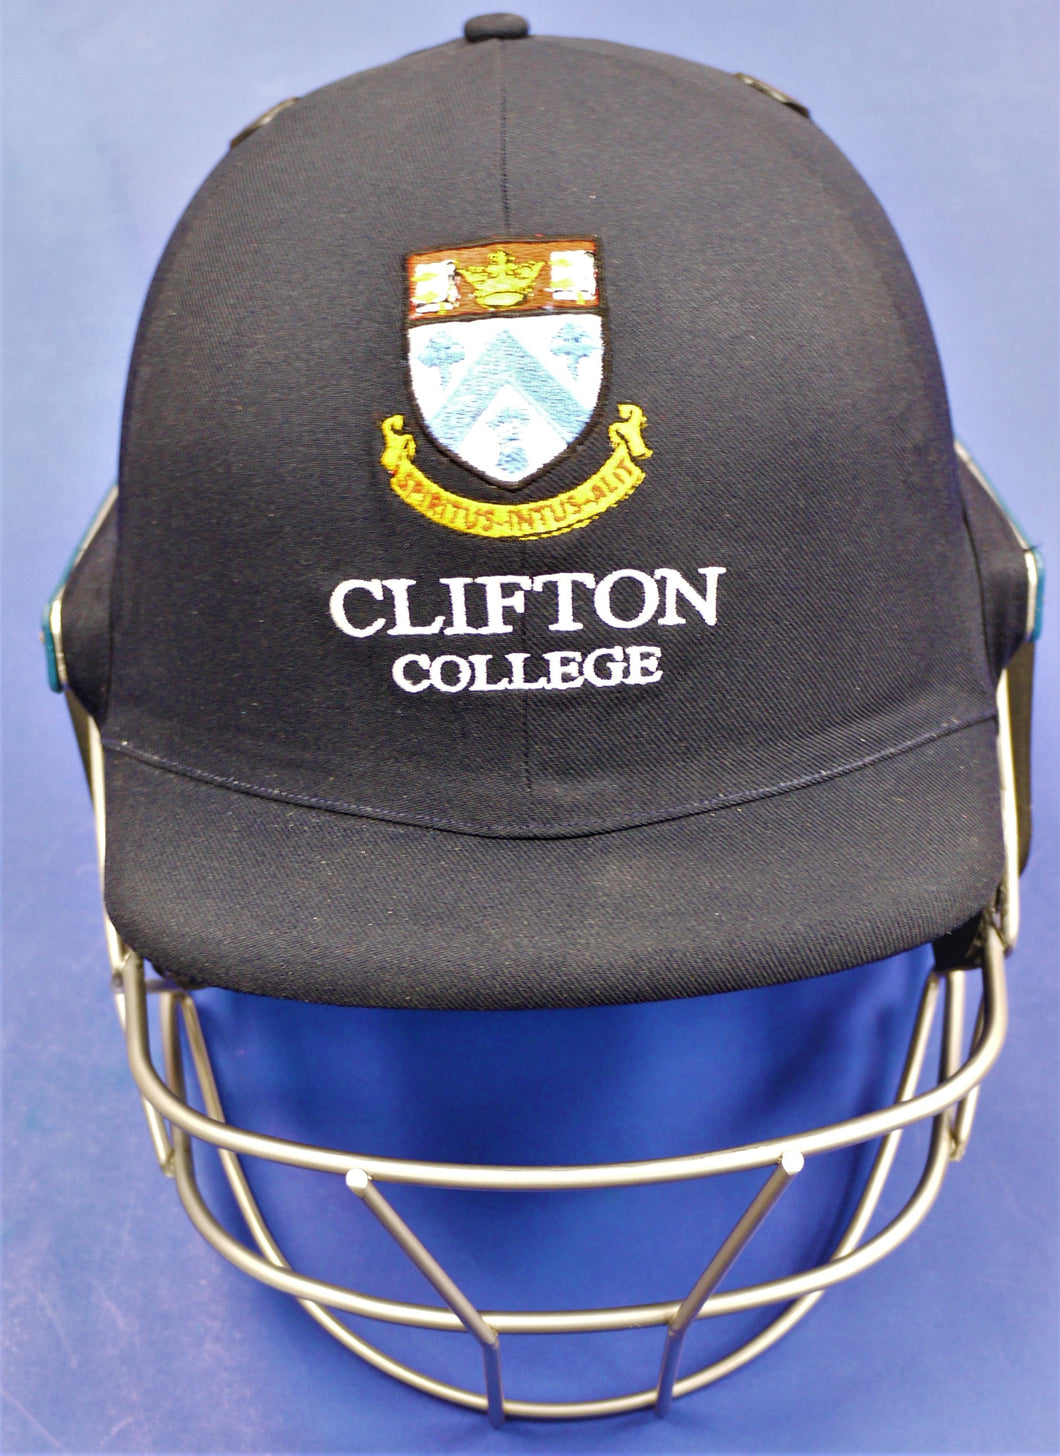 Cricket Helmet With Clifton Crest